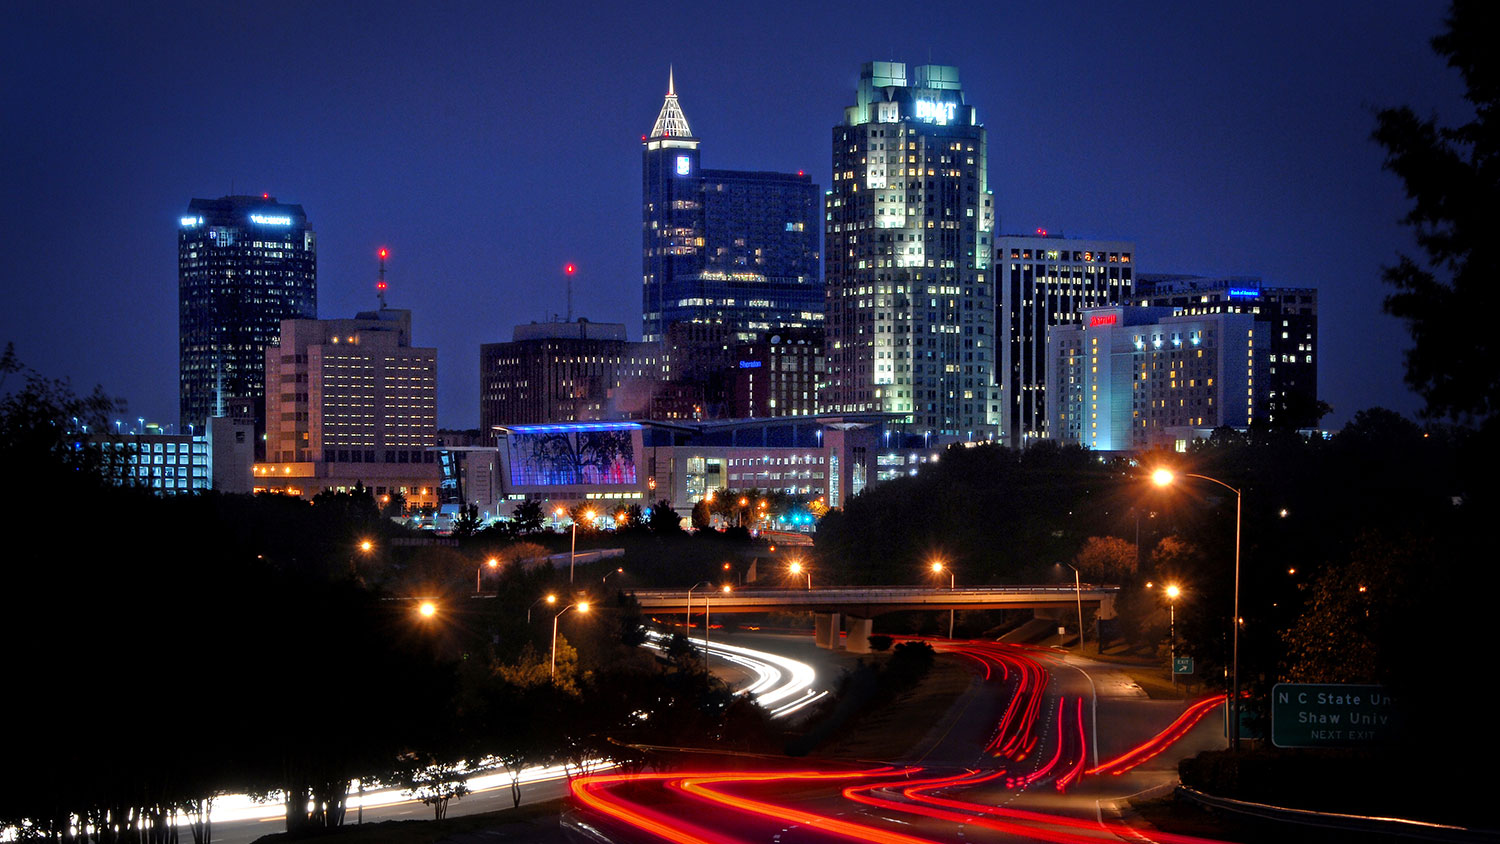 NC State Co-Hosts Smart Cities Summit Oct. 31 | NC State News